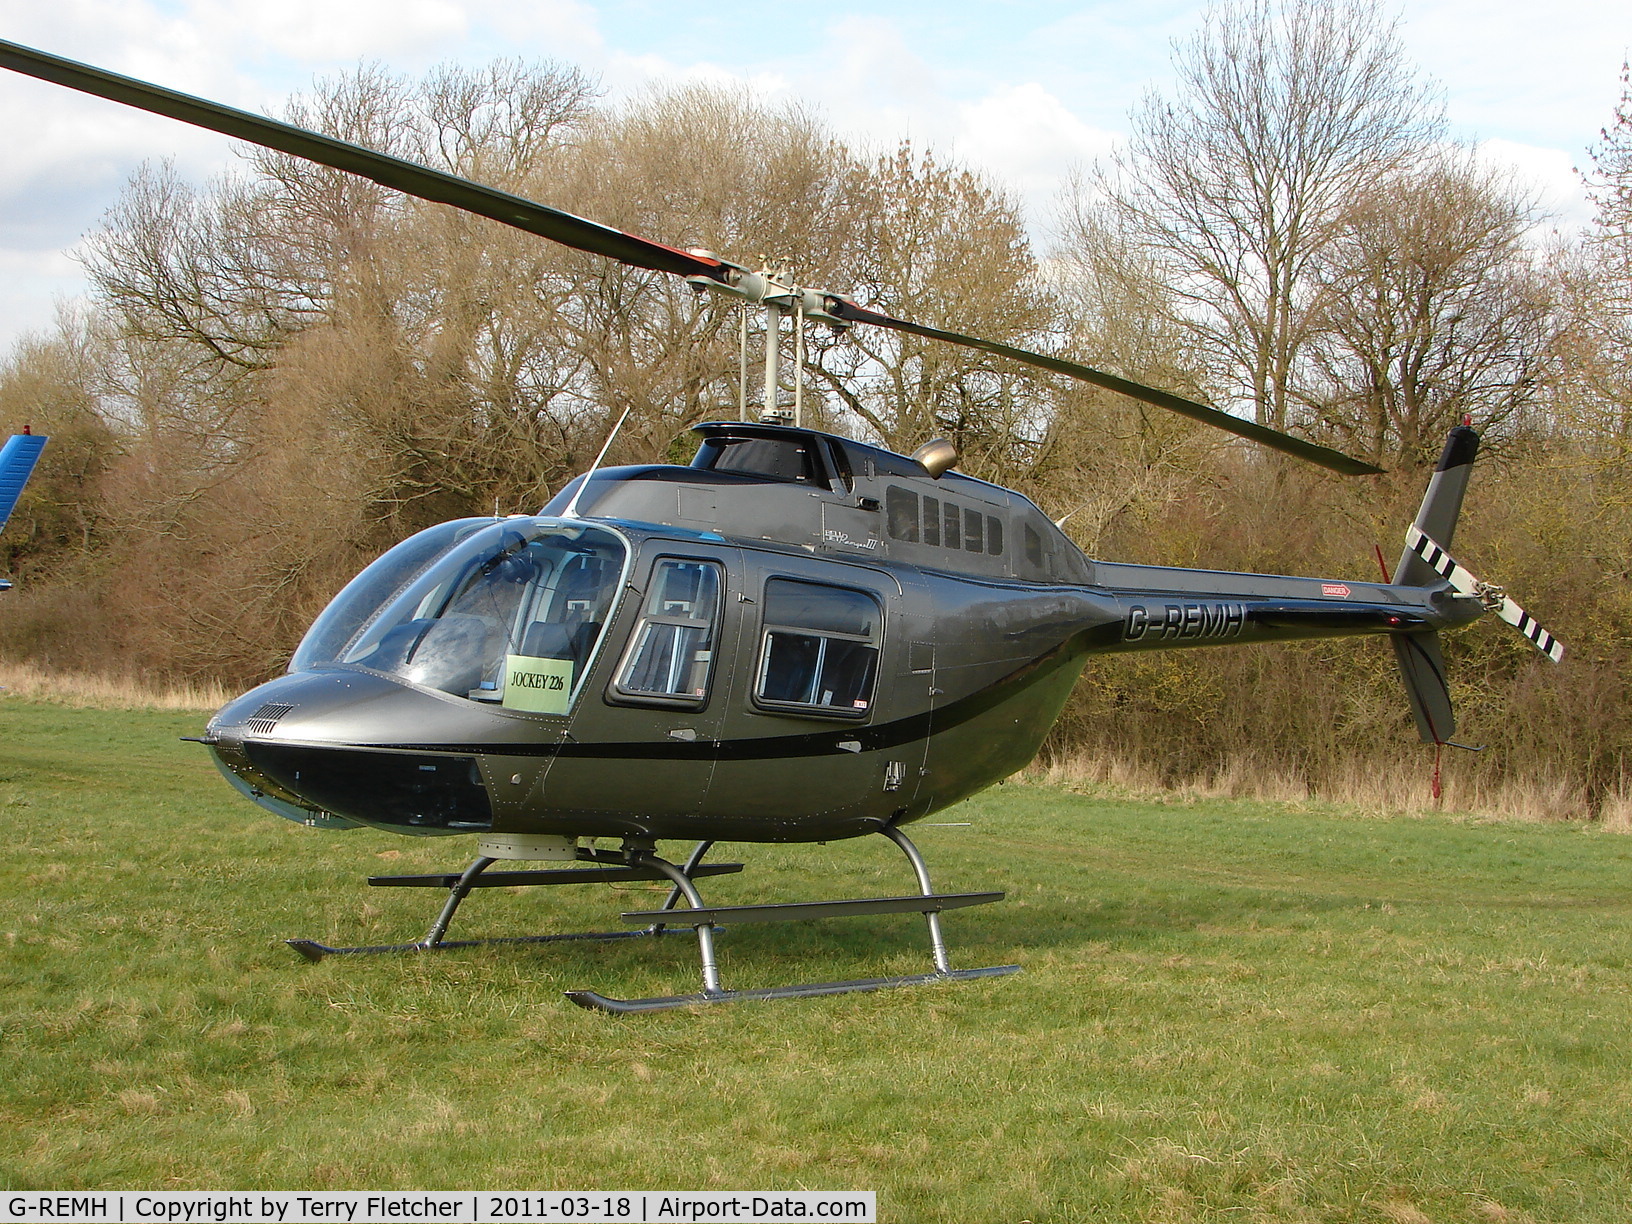 G-REMH, 2007 Bell 206B JetRanger III C/N 4626, A visitor to Cheltenham Racecourse on 2011 Gold Cup Day